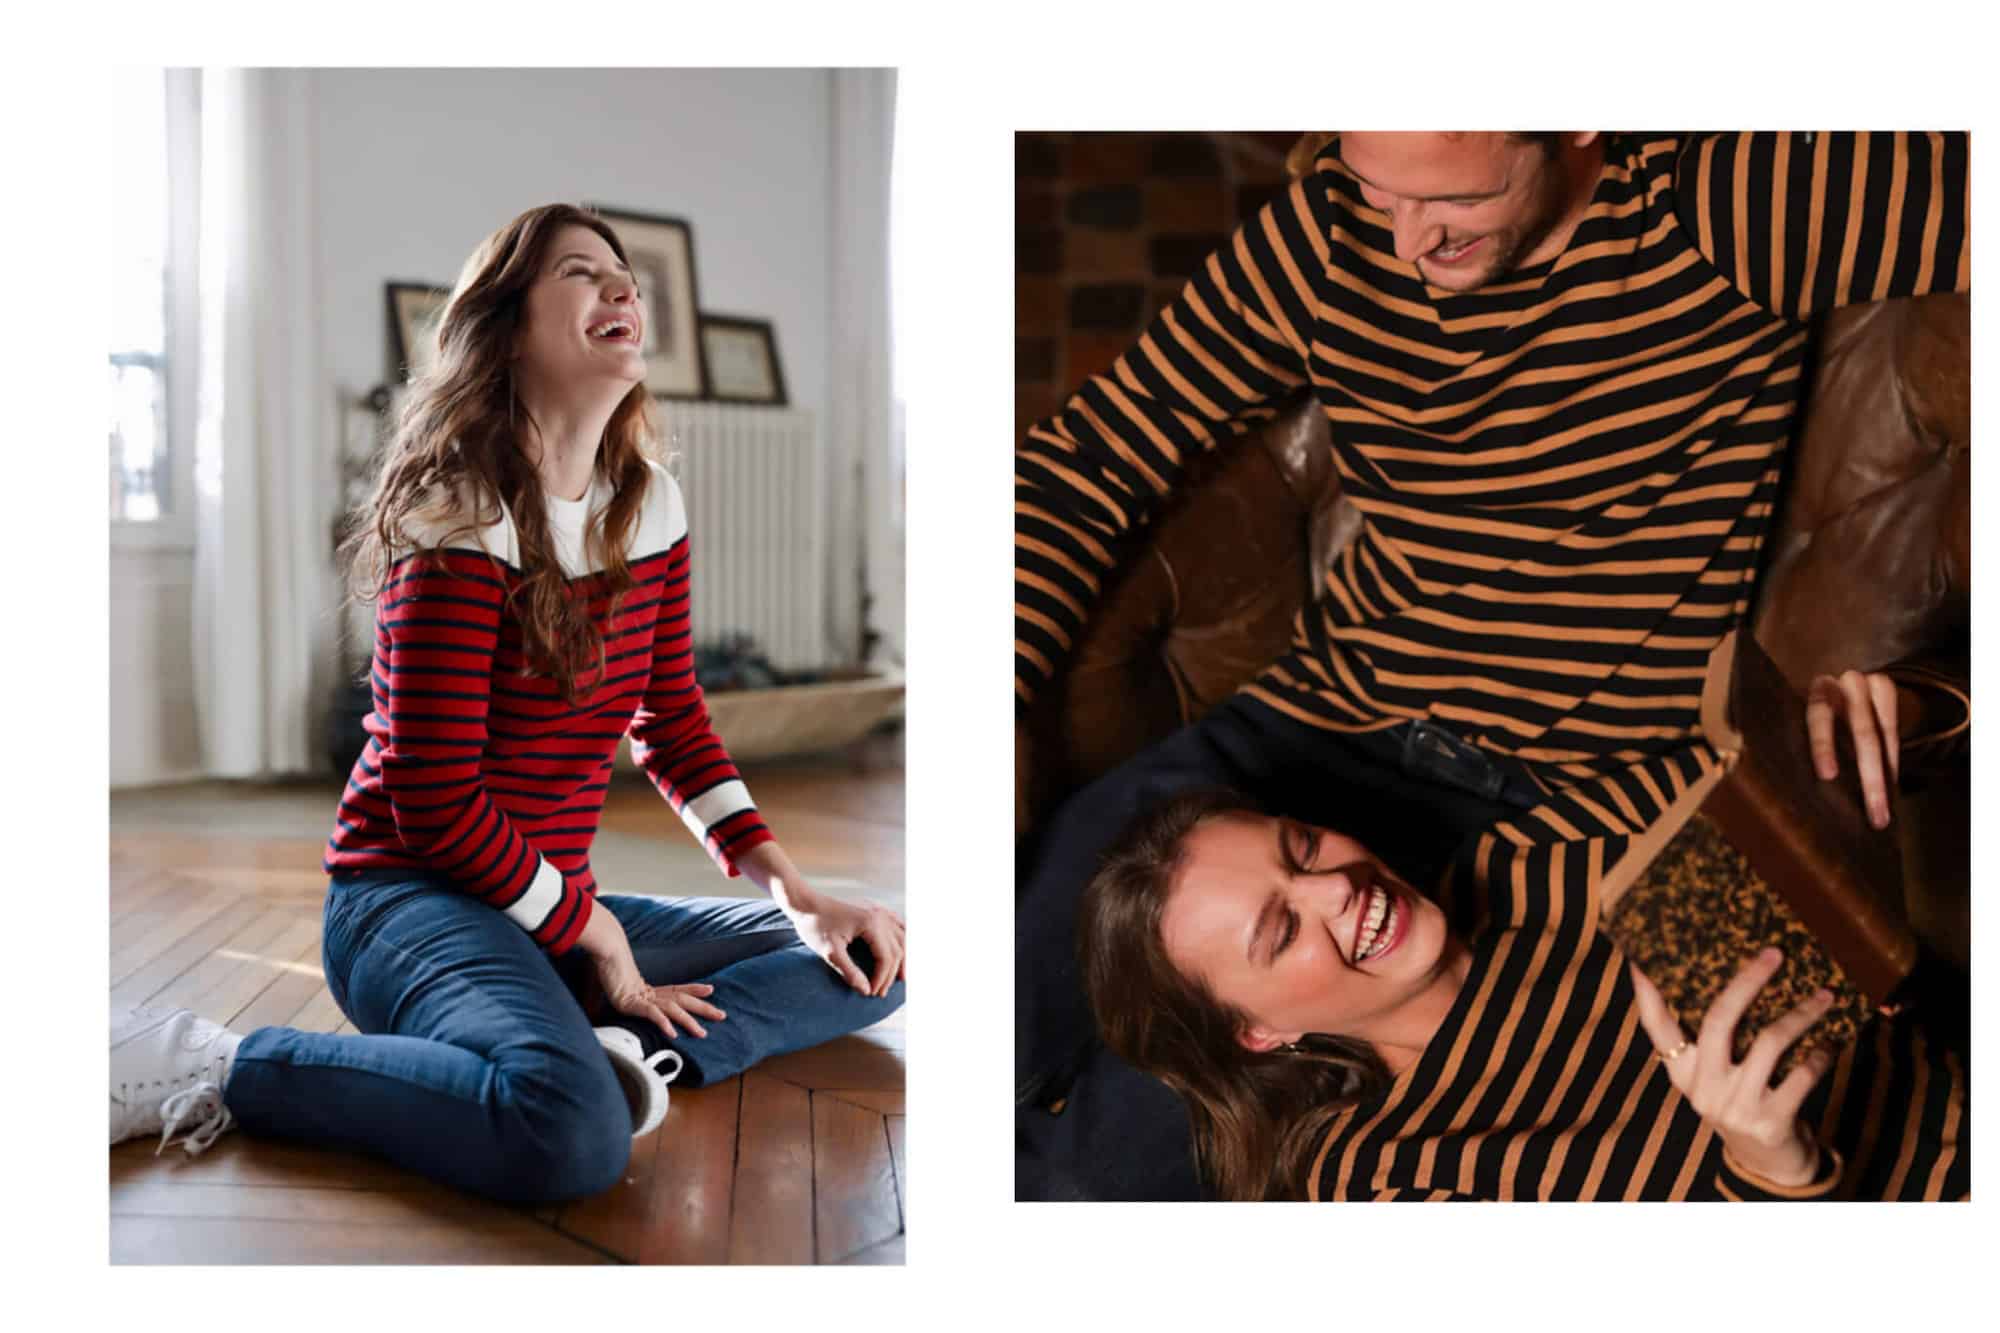 Left: a woman with long black hair sits smiling on a parquet floor in a Paris apartment, wearing white sneakers, jeans, and a red and dark blue striped sweater with a white band across the shoulders and collar. Right: a smiling man sits on a brown leather sofa with a woman resting her head in his lap, also smiling. They are both wearing matching black and tan striped tops from Saint James.